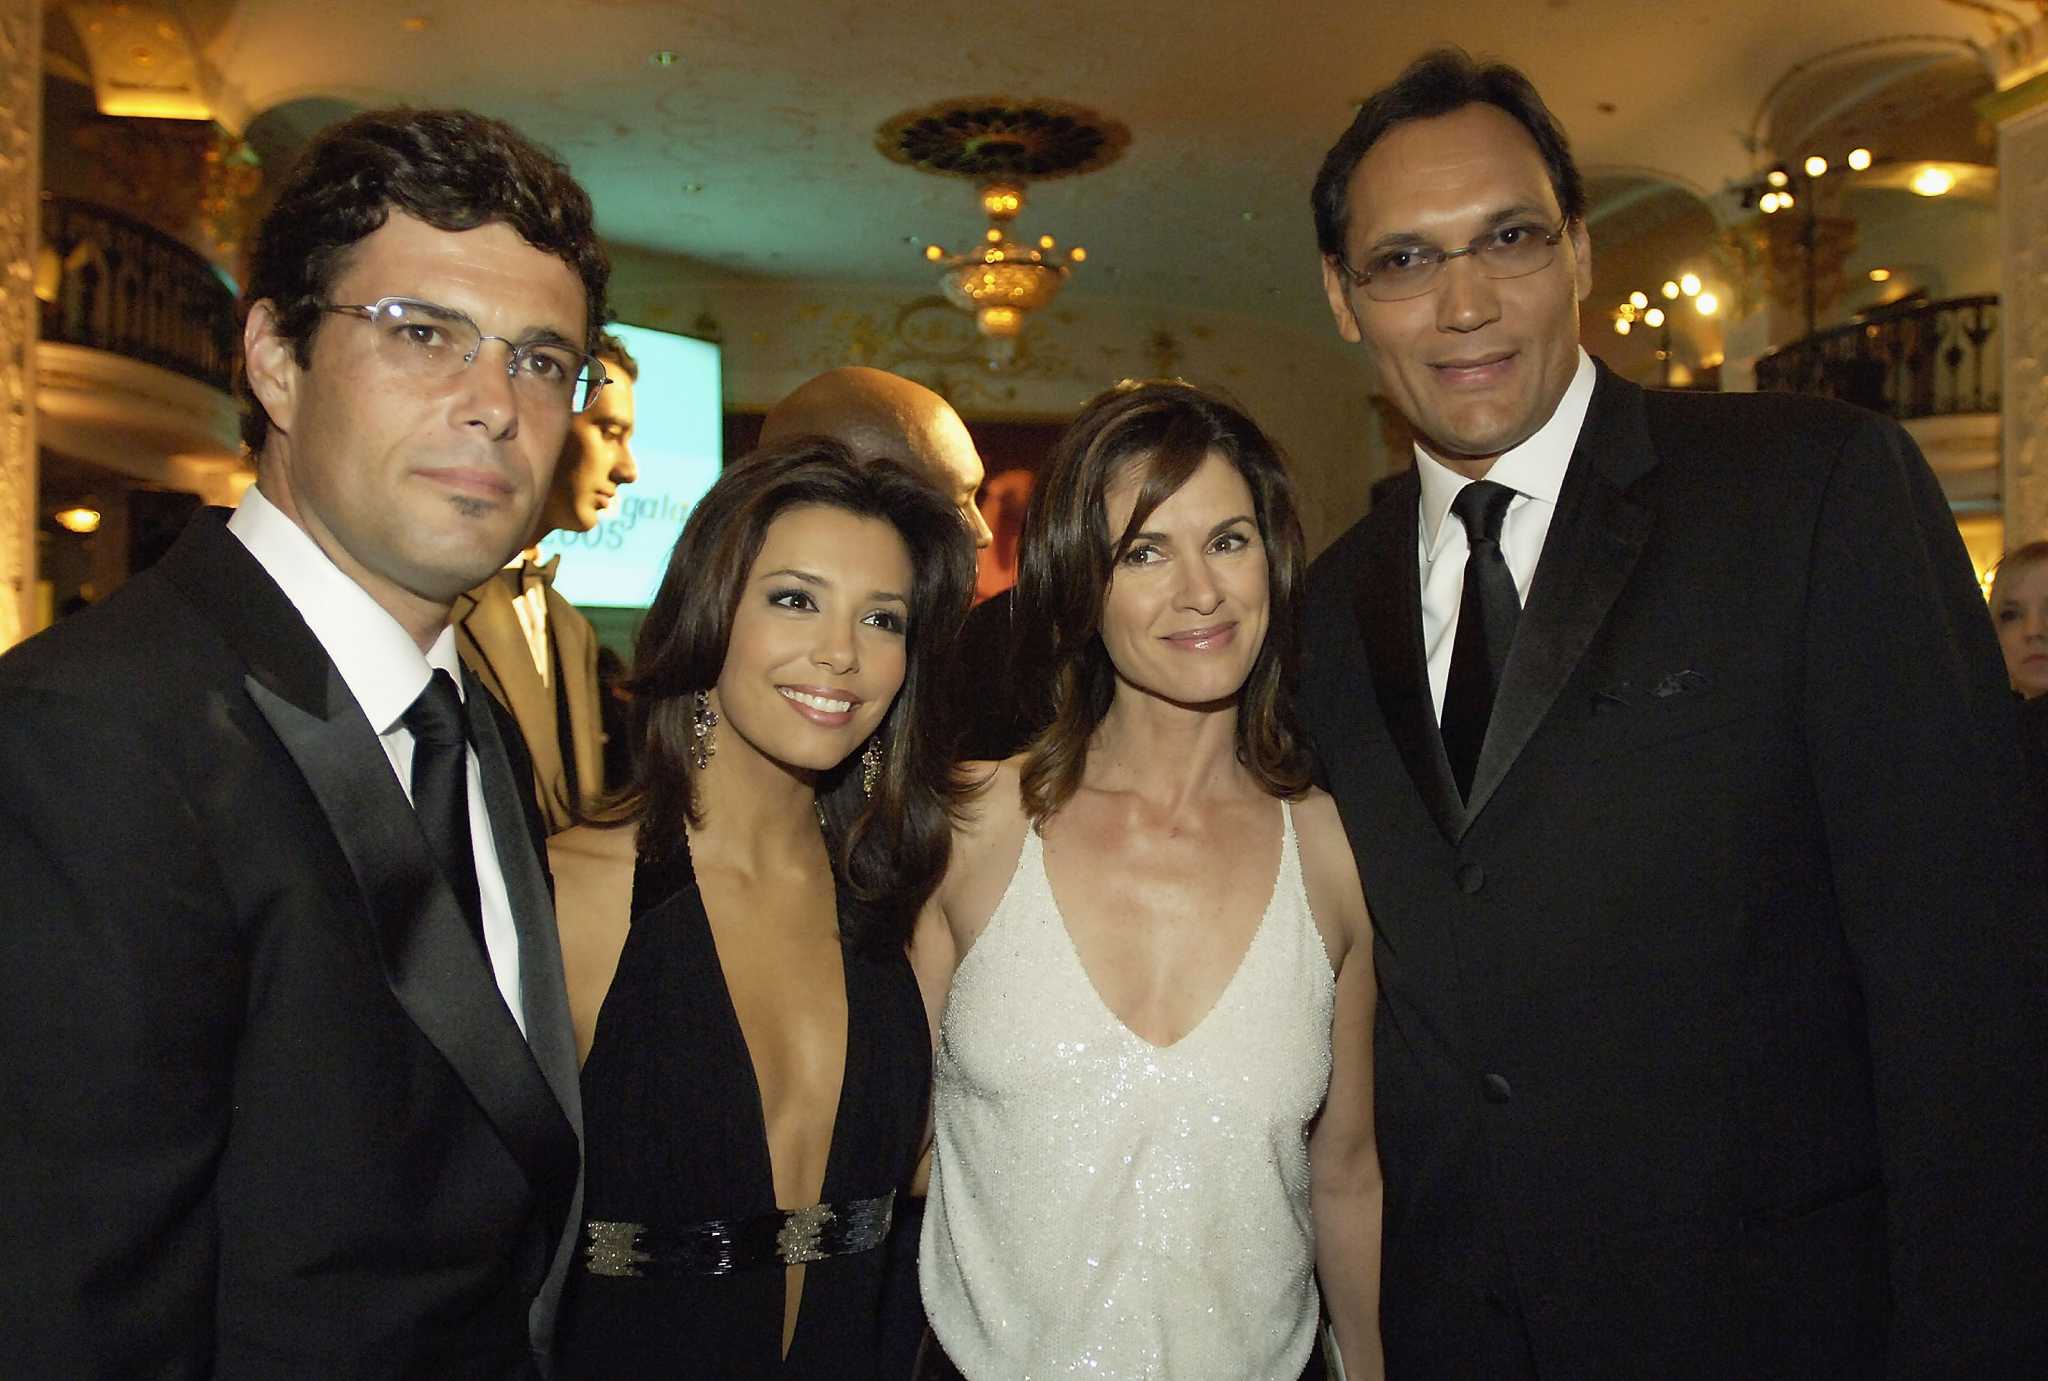 Eva Longoria Parker and John and Cindy McCain attend the 2009 NBA